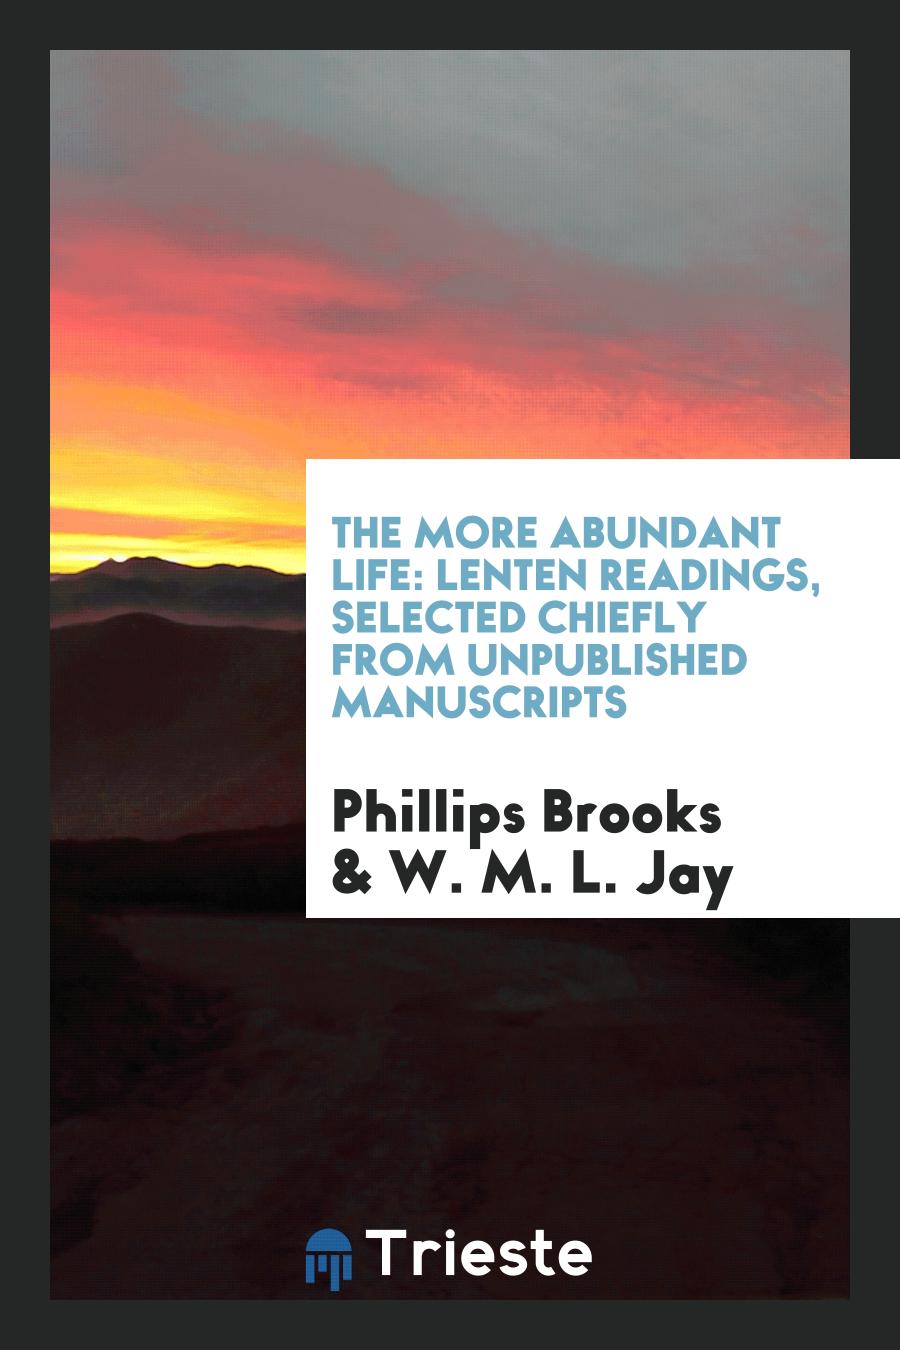 The More Abundant Life: Lenten Readings, Selected Chiefly from Unpublished Manuscripts